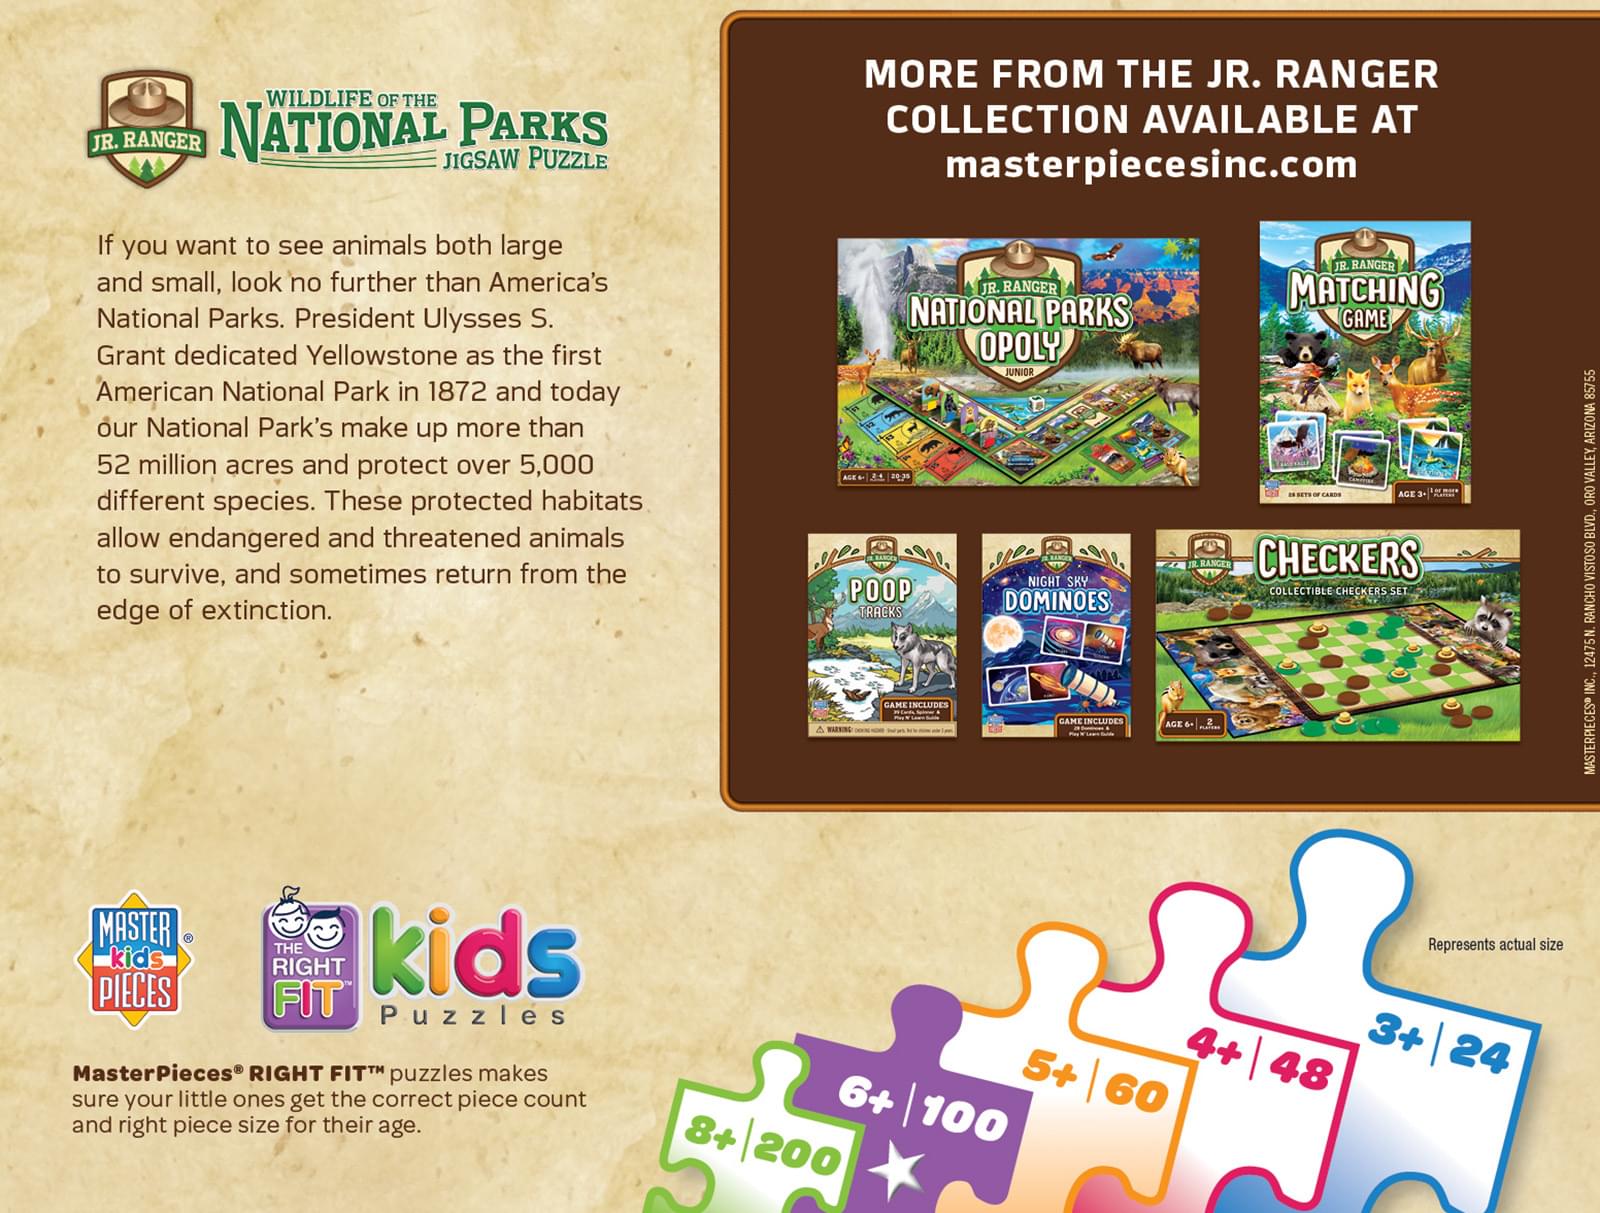 Wildlife of the National Parks 100 Piece Jigsaw Puzzle